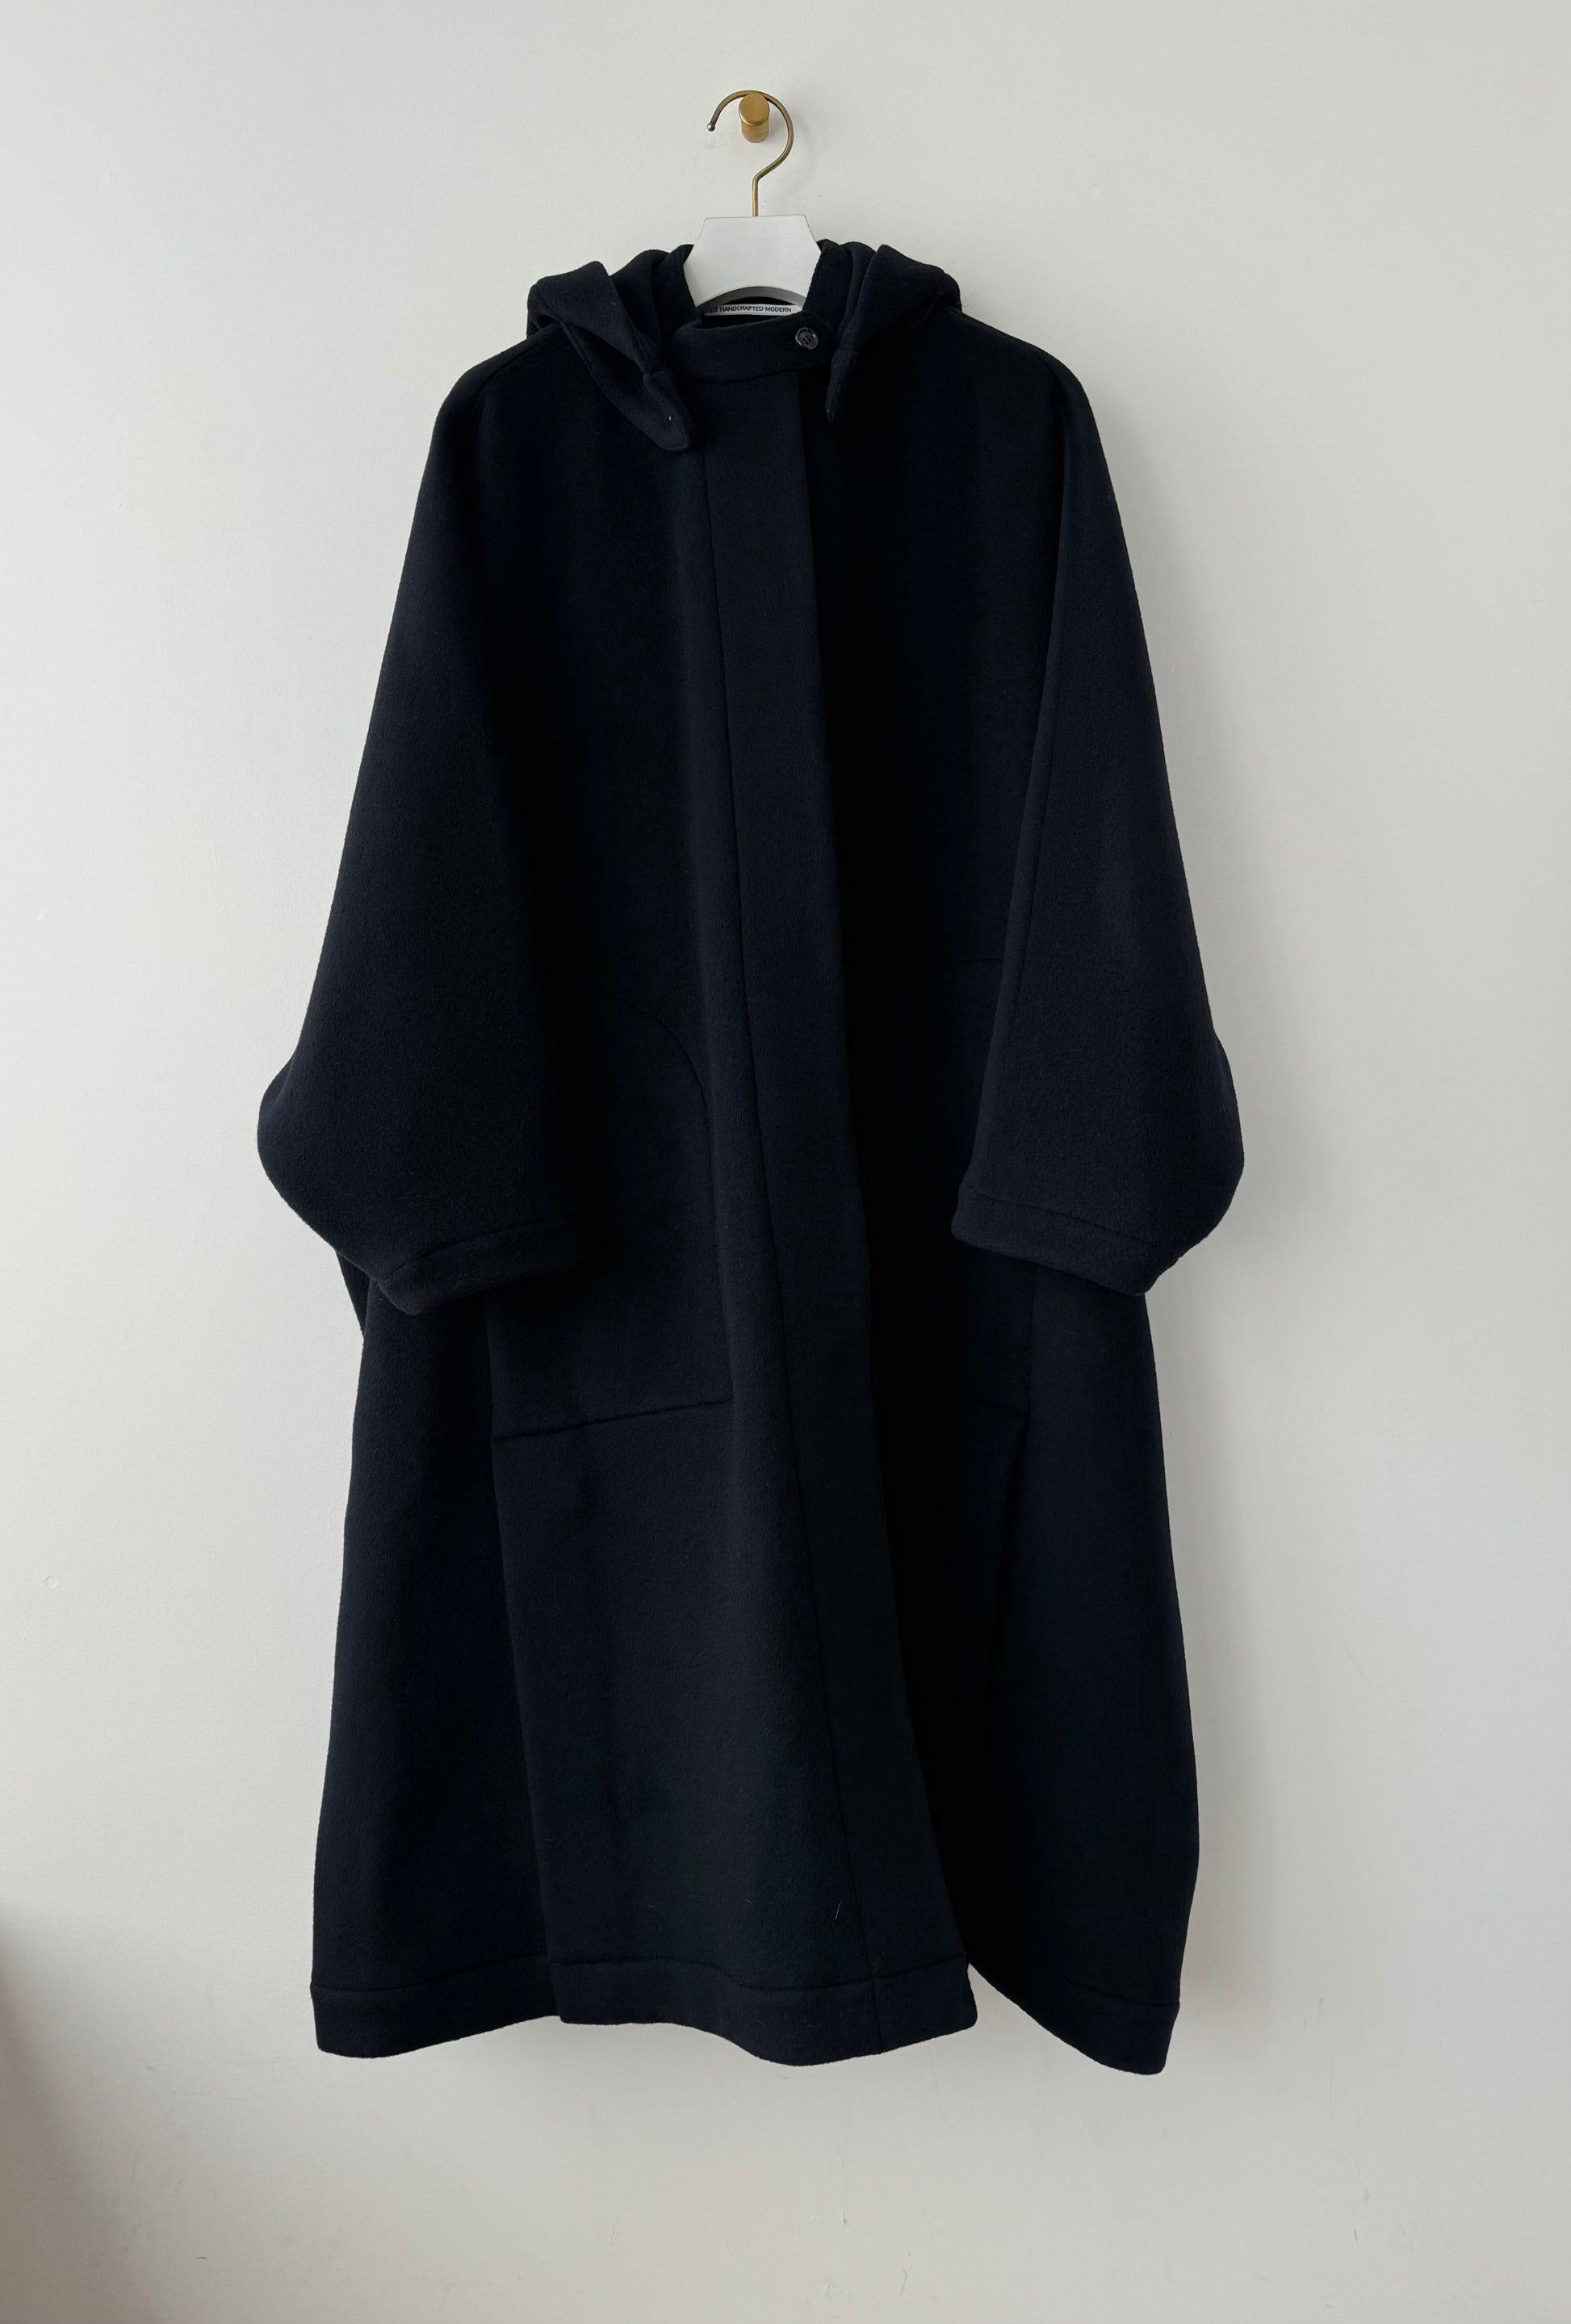 Long cape coat (Navy)　TENNE HANDCRAFTED MODERN コート　通販　取扱店